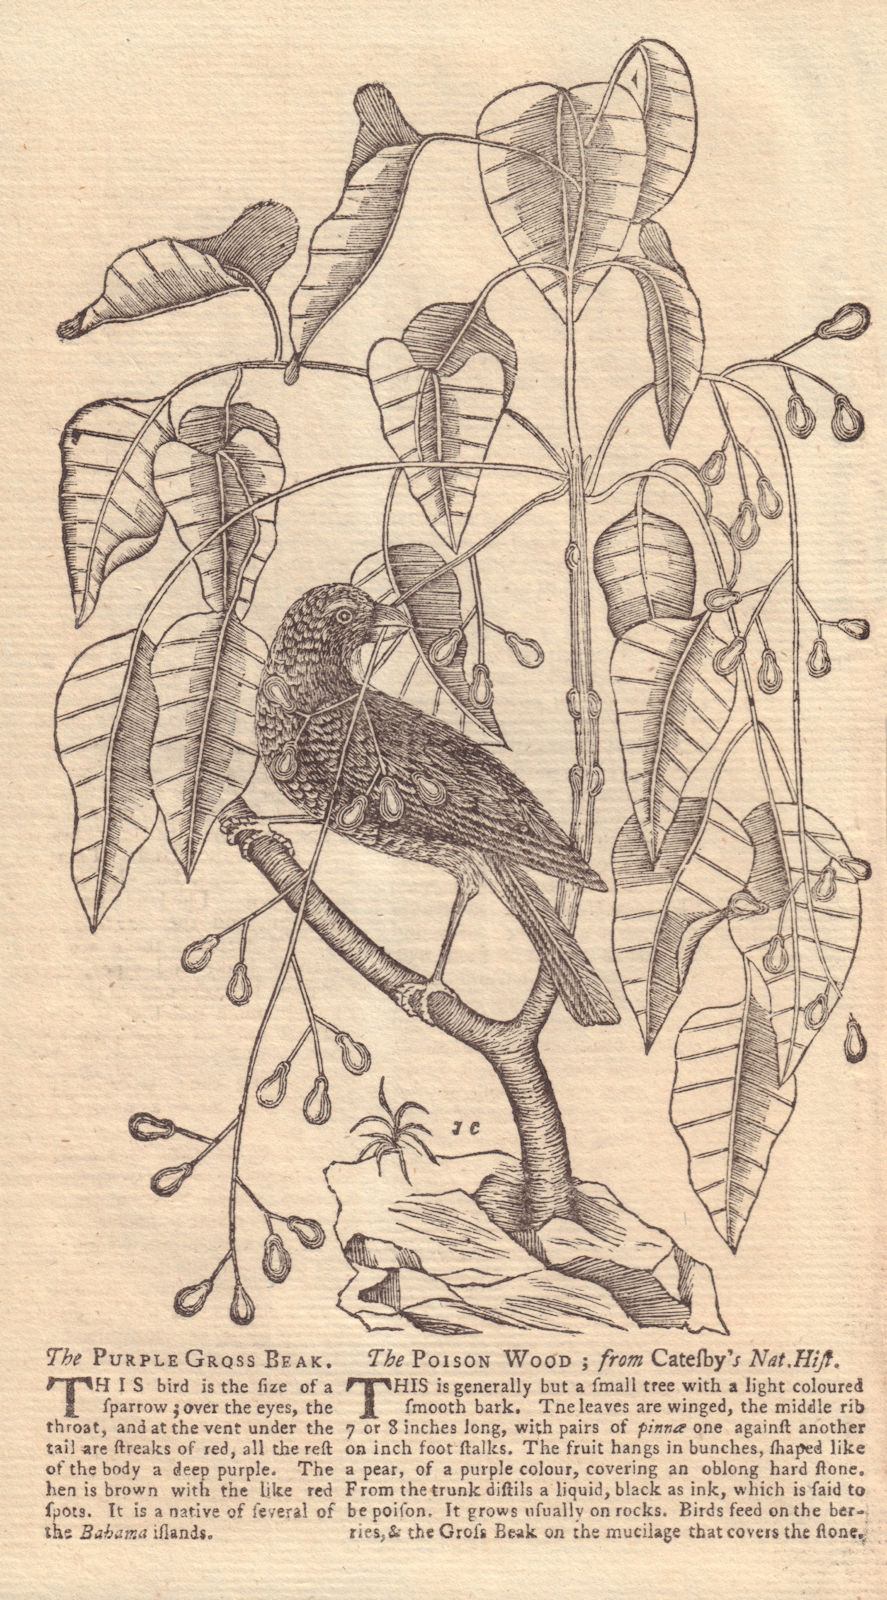 Associate Product The Purple Gross Beak, a bird and a tree called the Poison Wood 1753 old print